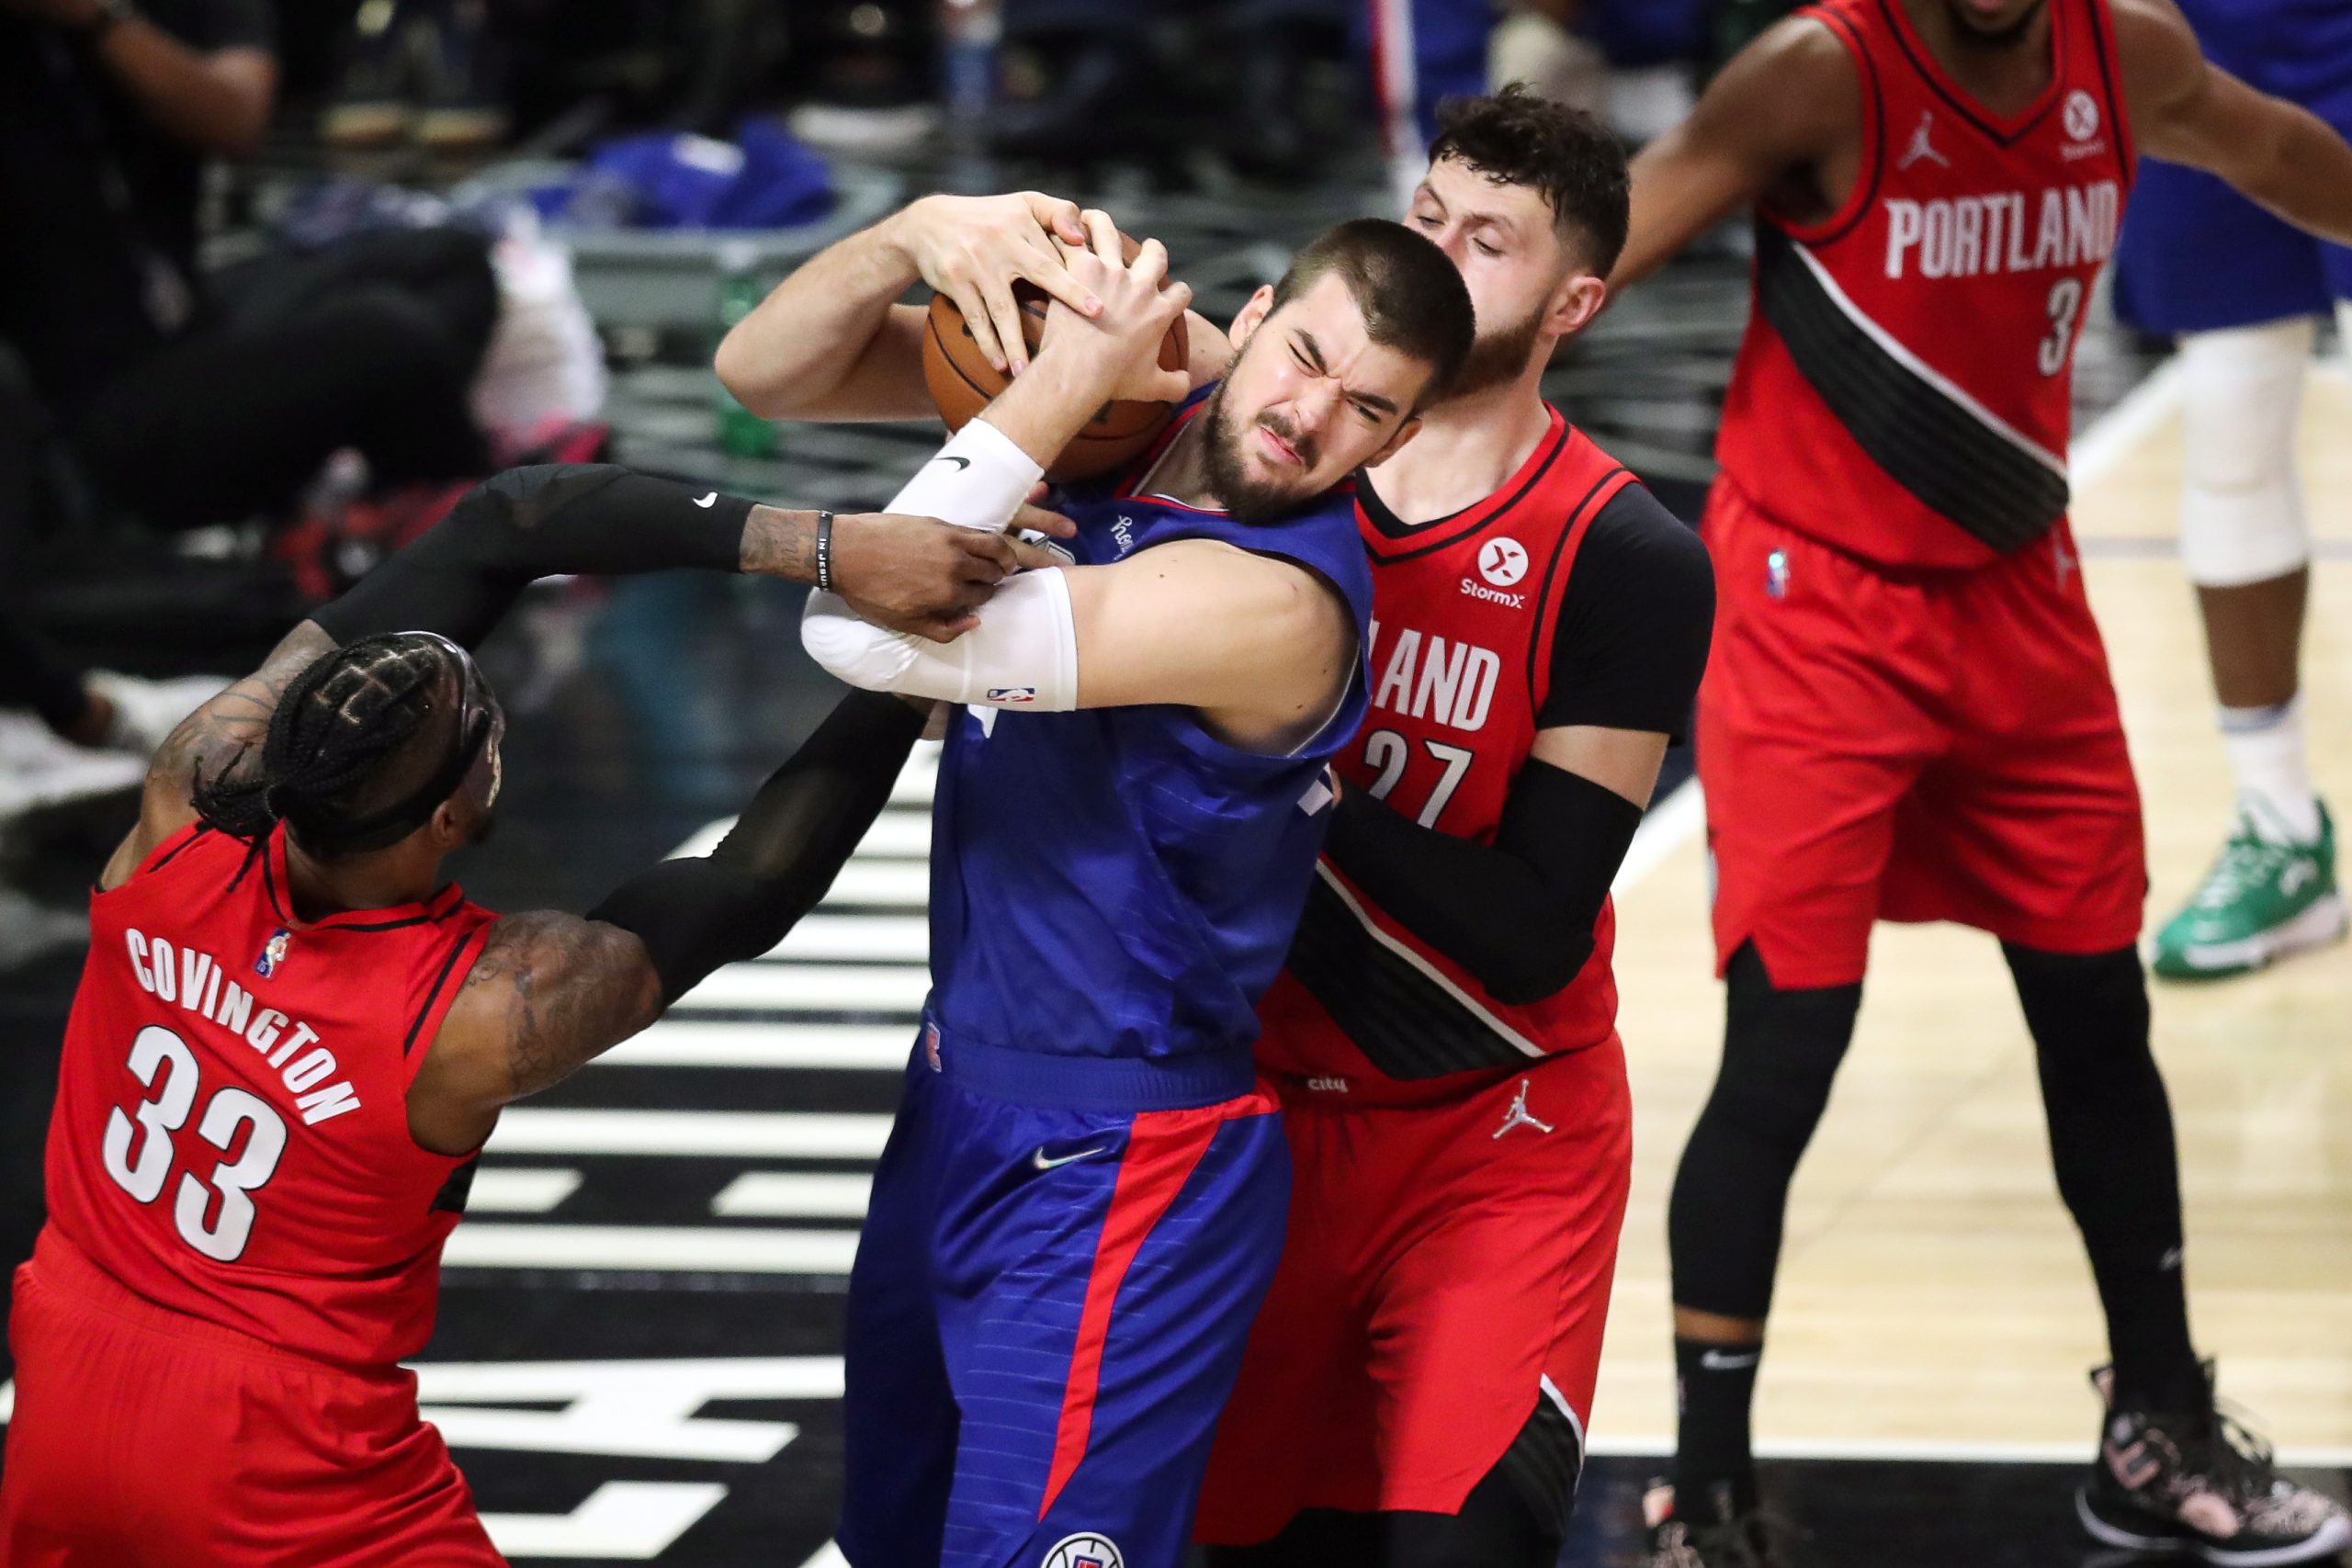 epa09573370 Los Angeles Clippers center Ivica Zubac (C-L) holds onto the ball while being guarded by Portland Trail Blazers forward Robert Covington (L) and Portland Trail Blazers center Jusuf Nurkic (R) during the second quarter of the NBA basketball game between the Los Angeles Clippers and Portland Trail Blazers at the Staples Center in Los Angeles, California, USA, 09 November 2021.  EPA/CAROLINE BREHMAN  SHUTTERSTOCK OUT